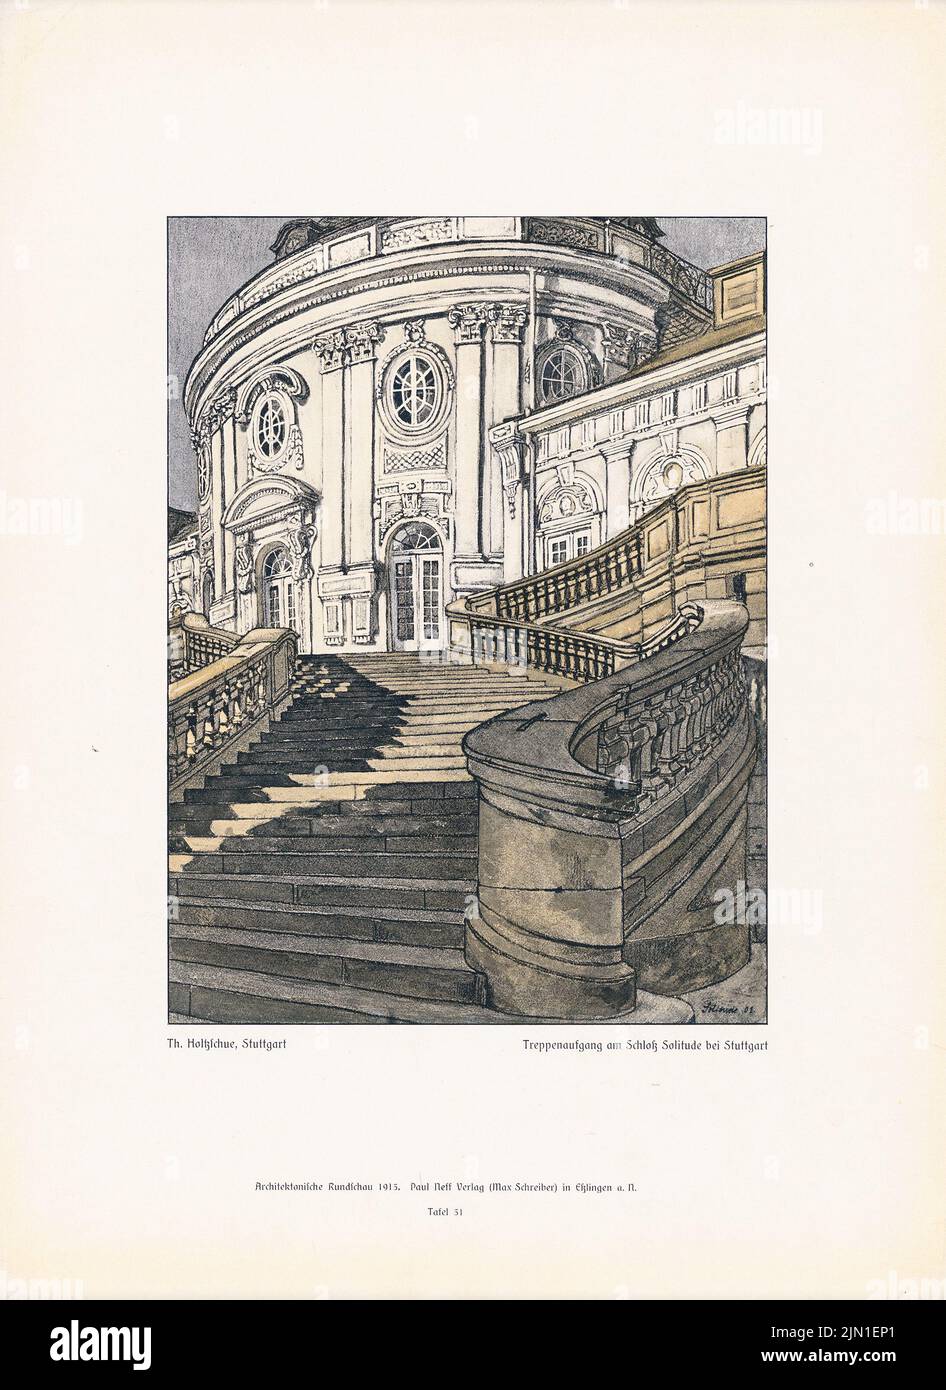 Holtzschue Th., Staircase Castle Solitude, Stuttgart. (From: Architect. Rundschau, ed. V. Eisenlohr & Weigle, 1913) (1913-1913): Perspective view. Print colored on paper, 39.1 x 28.5 cm (including scan edges) Holtzschue Th. : Treppenaufgang Schloss Solitude, Stuttgart. (Aus: Architekt. Rundschau, hrsg.v. Eisenlohr & Weigle, 1913) Stock Photo